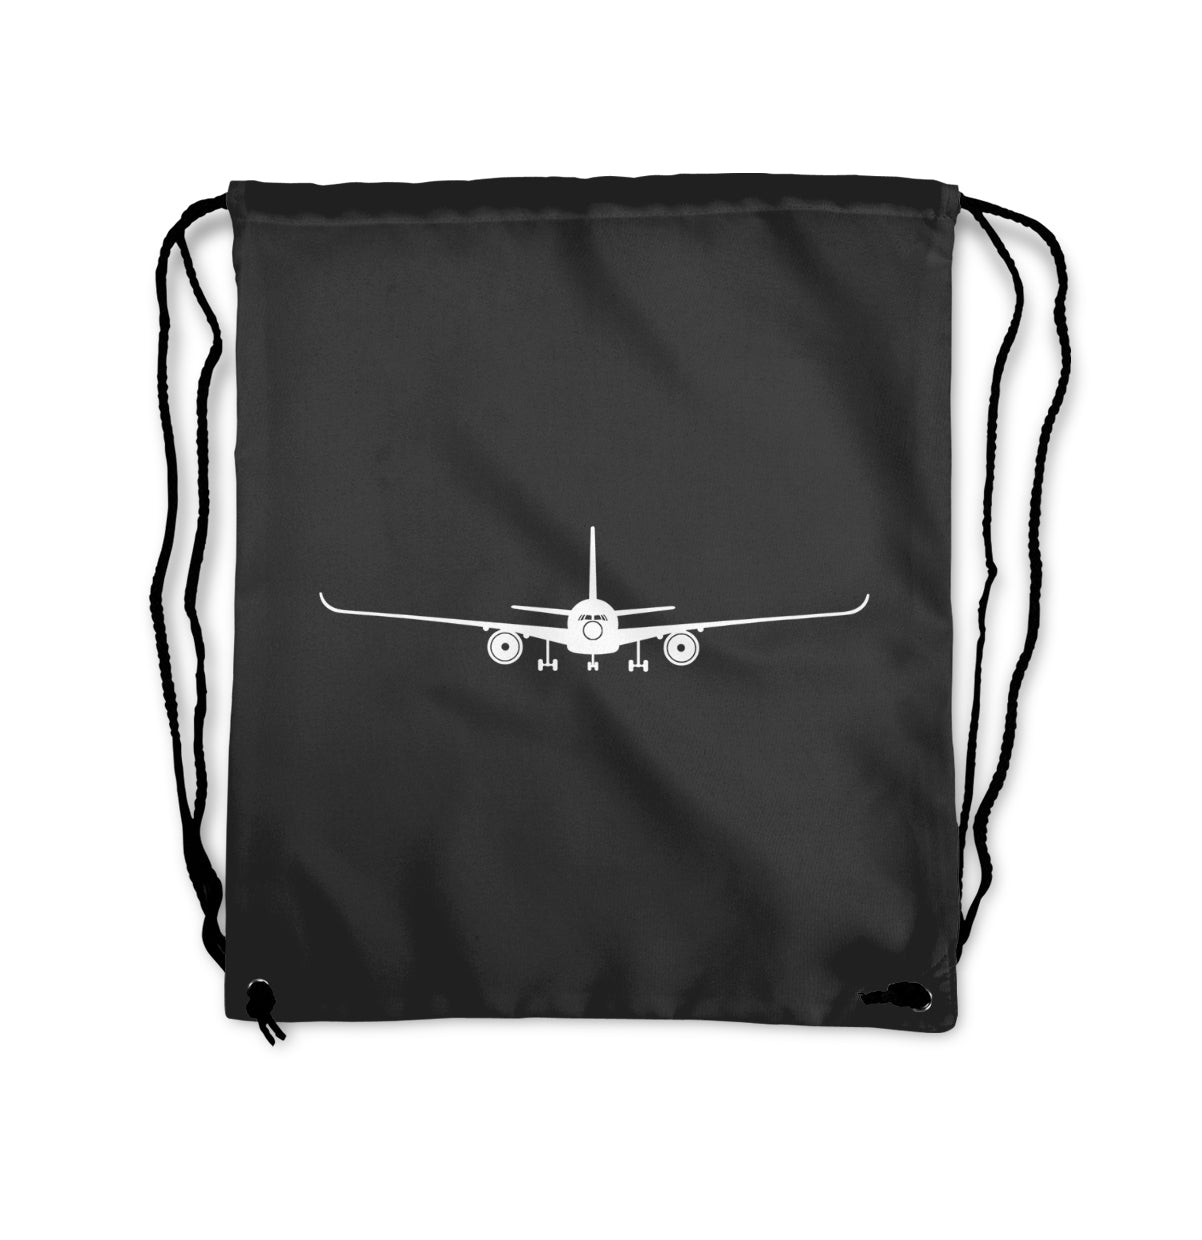 Airbus A350 Silhouette Designed Drawstring Bags